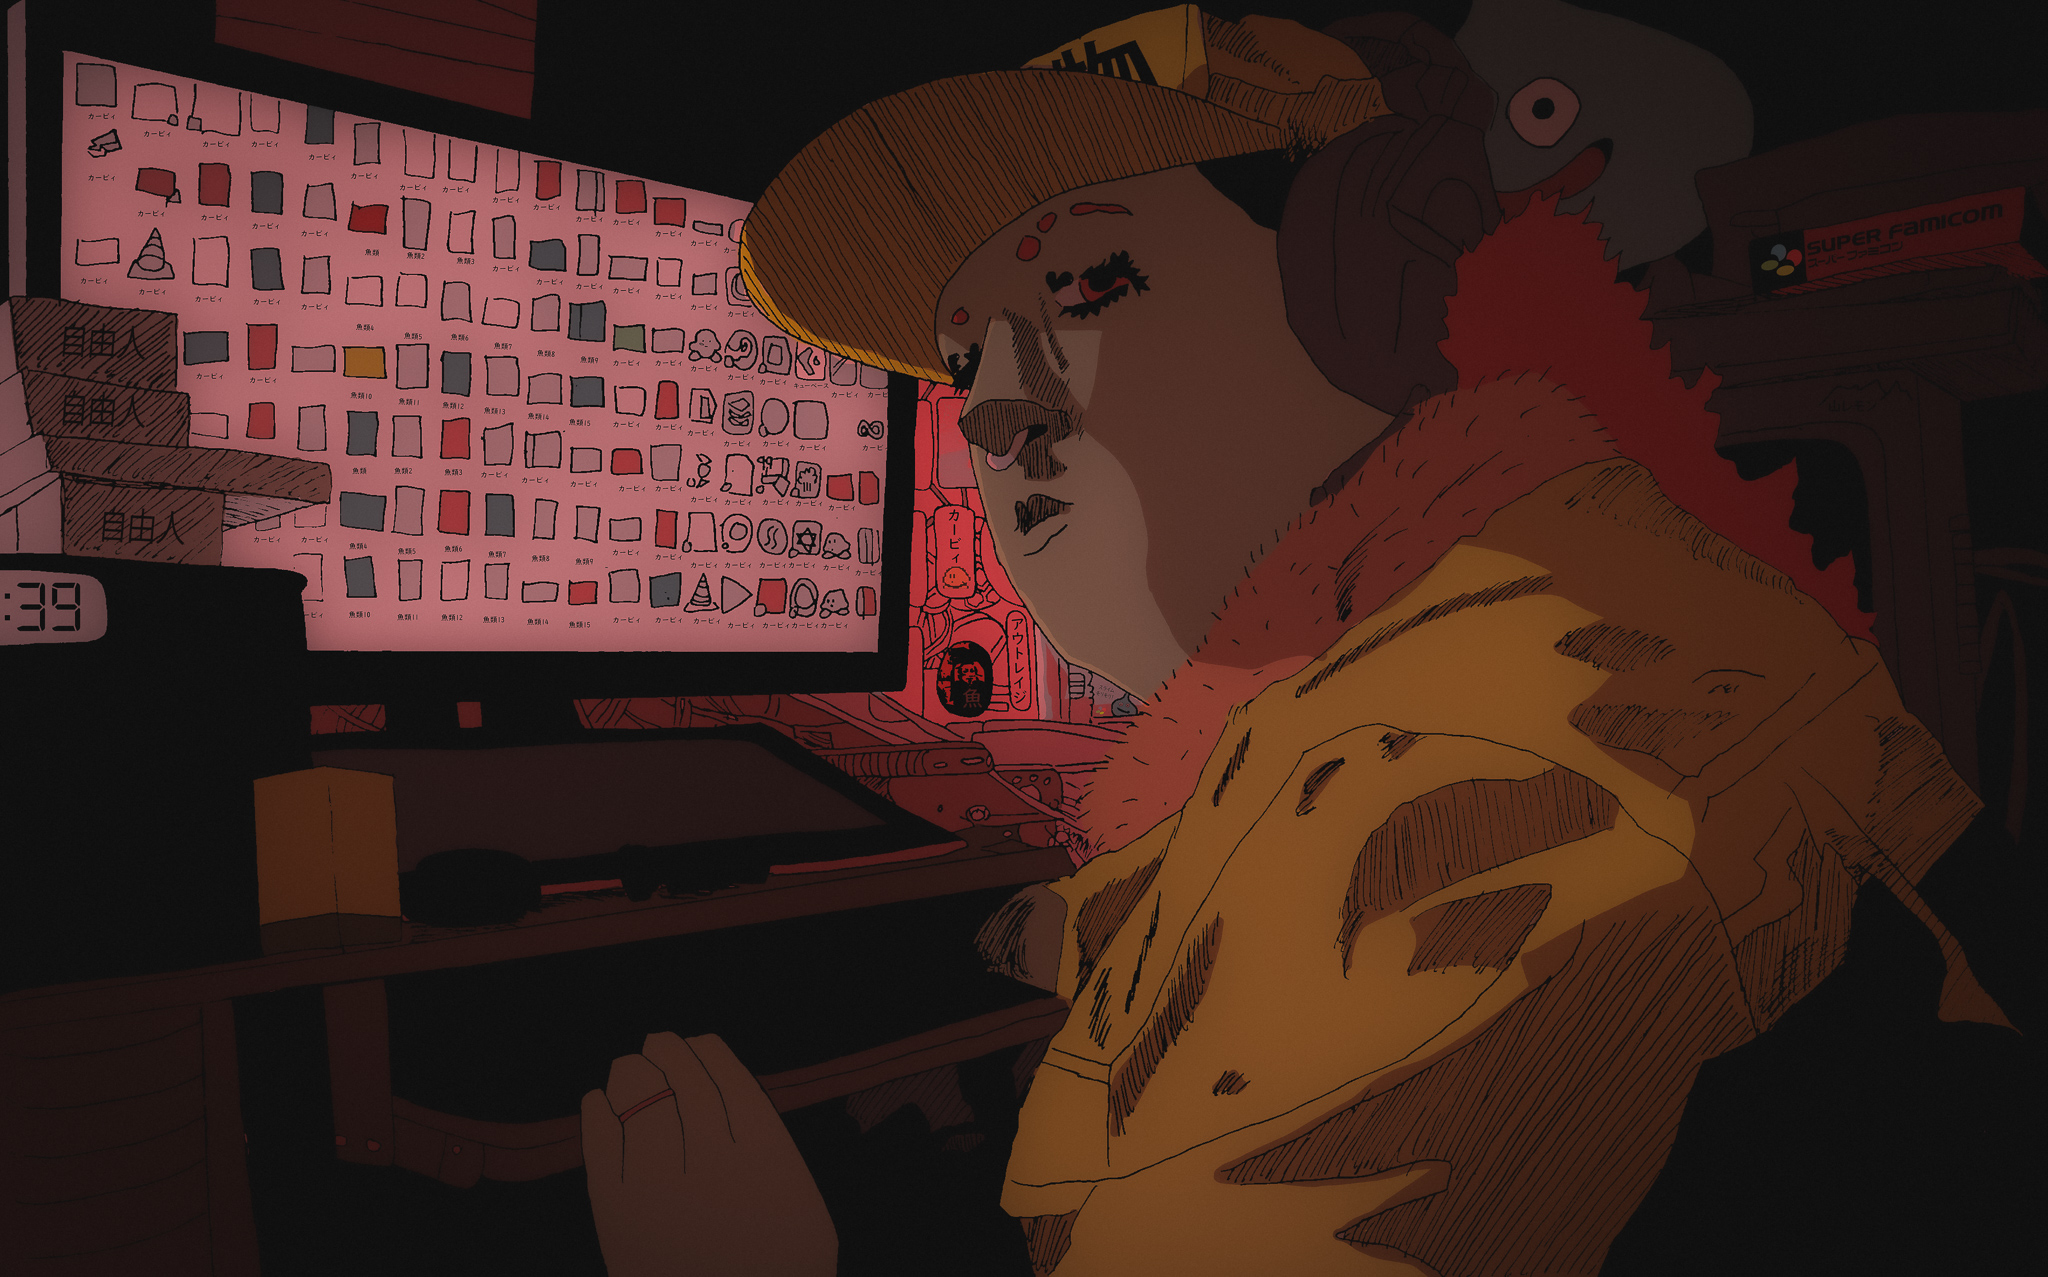 illustration of a goblin in front of a computer with a dreamy mood lighting